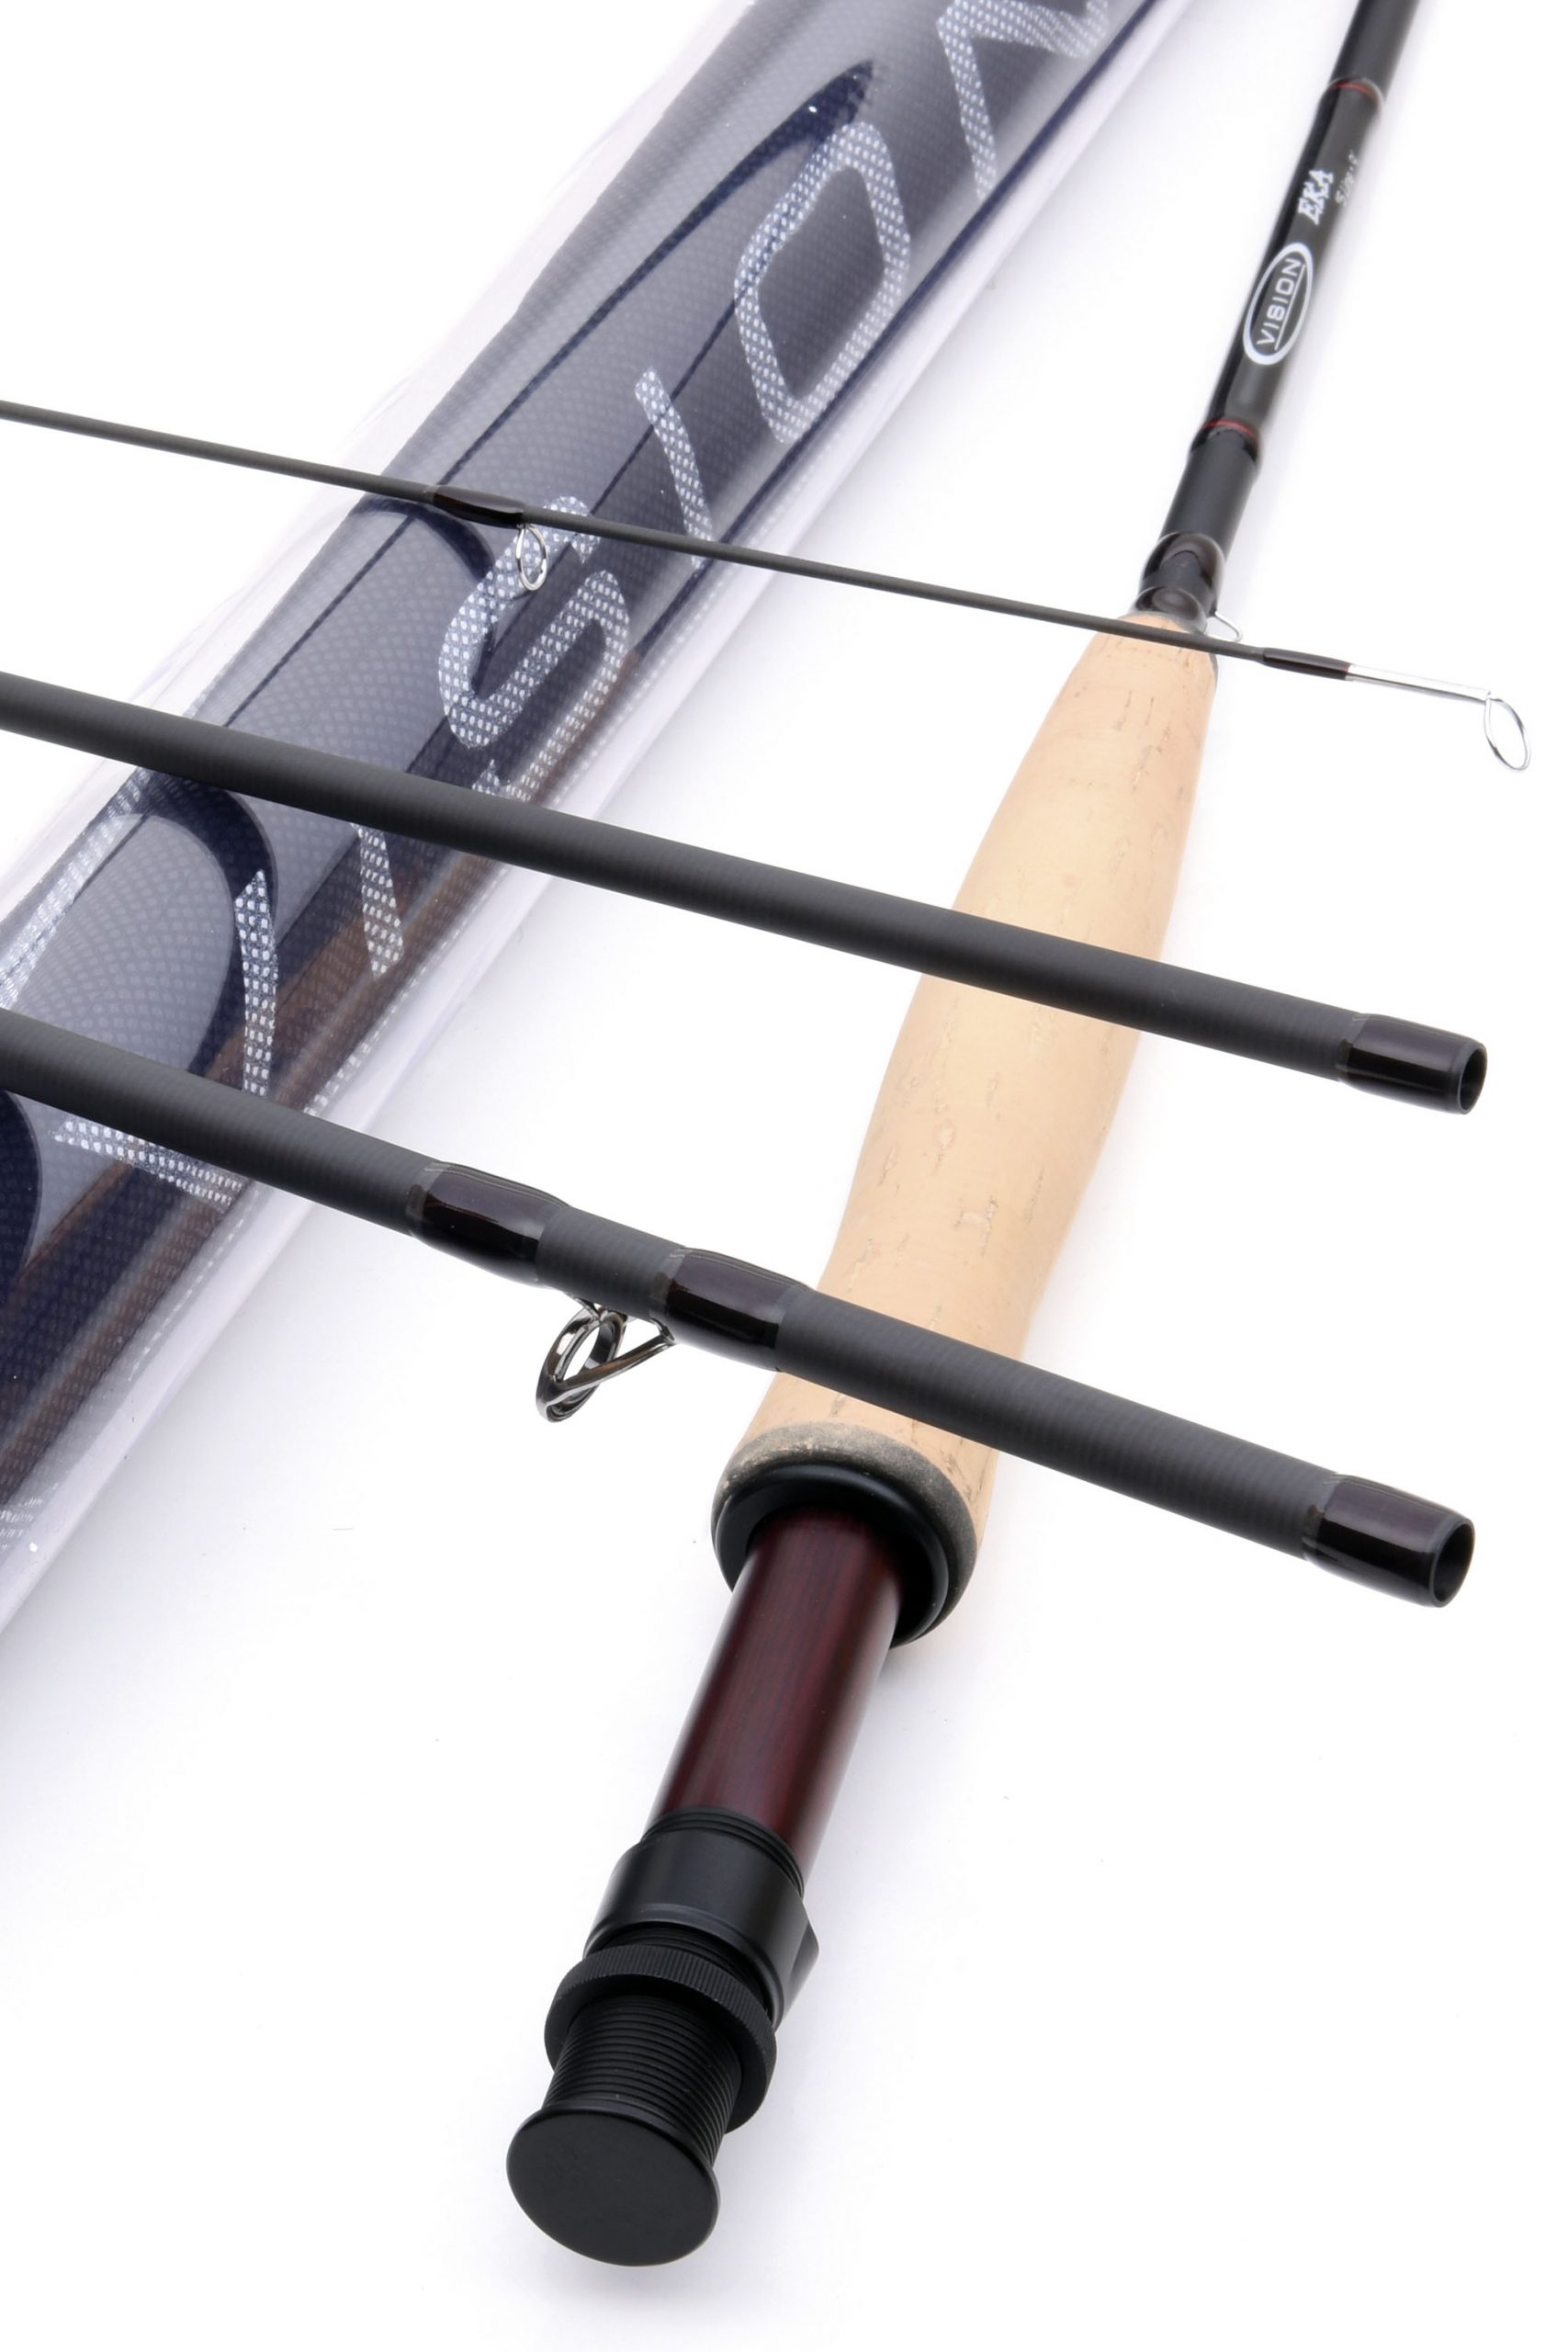 Vision Eka Fly Rod 9 Foot 6'' #7 For Fly Fishing (Length 9ft / 2.75m)